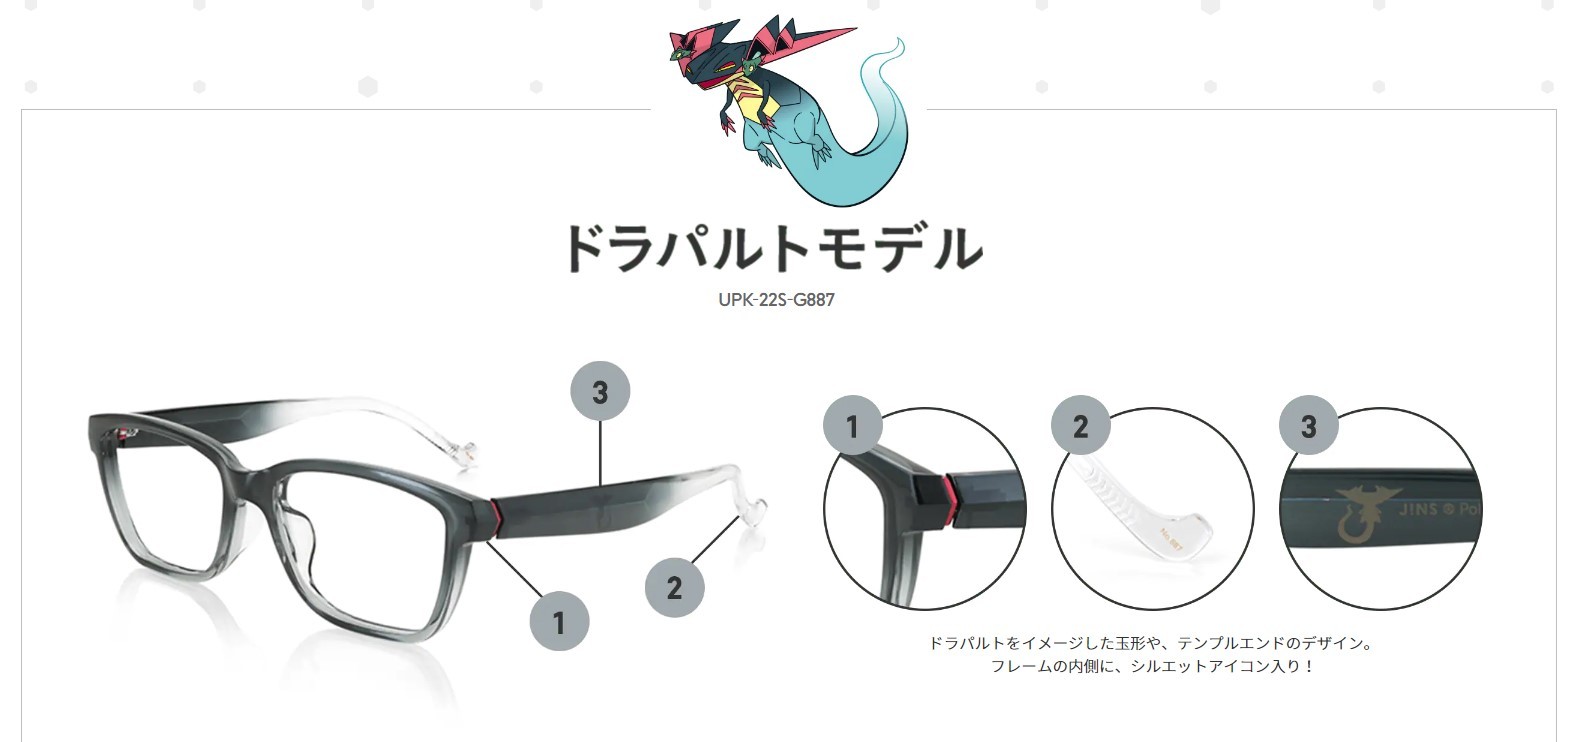 IGN - JINS Eyewear and The Pokemon Company are collaborating on glasses  inspired by Pikachu, Snorlax, Eevee, and more and they're surprisingly  stylish.